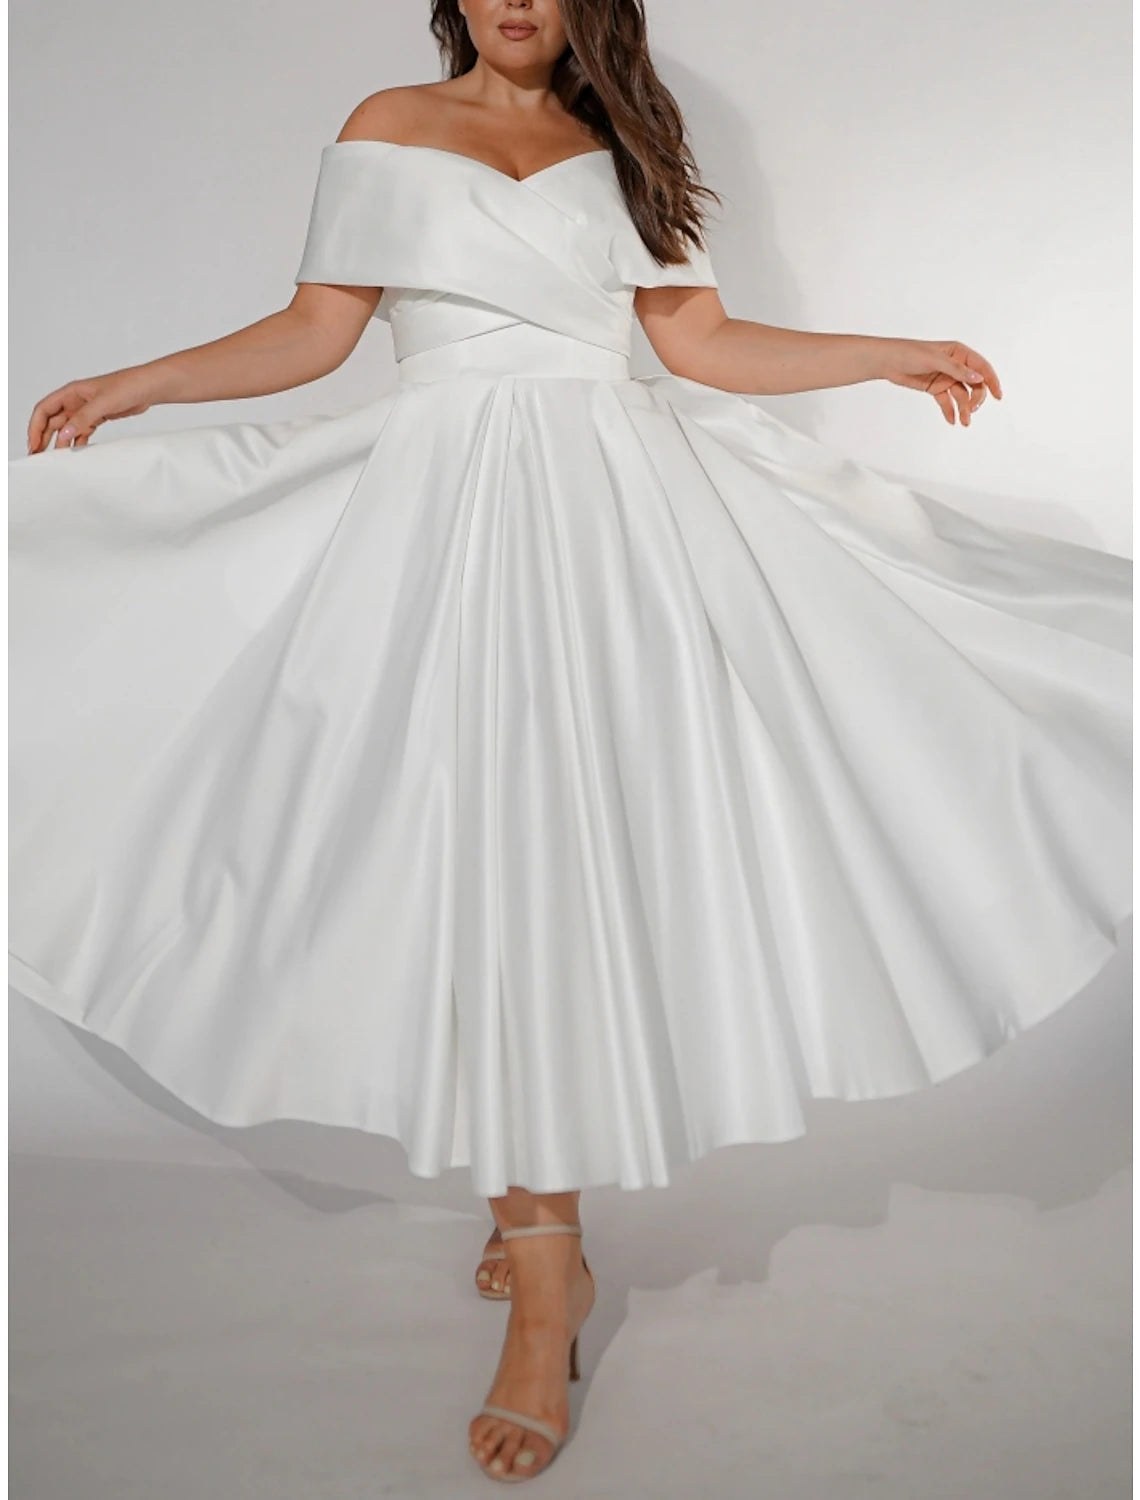 Casual Wedding Dresses A-Line Off Shoulder Short Sleeve Ankle Length Satin Bridal Gowns With Pleats Solid Color